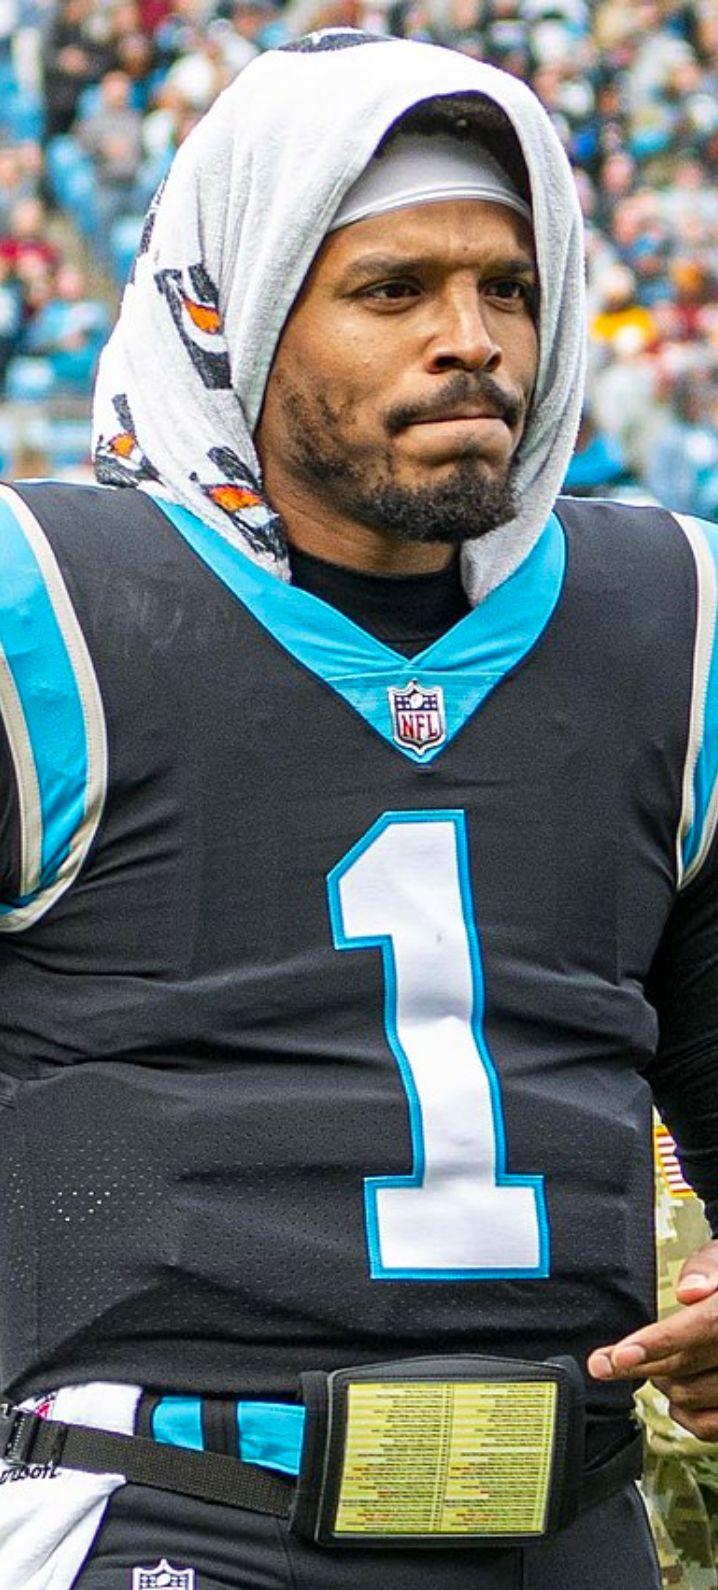 Cam Newton running the football in a game as a member of the Carolina Panthers.